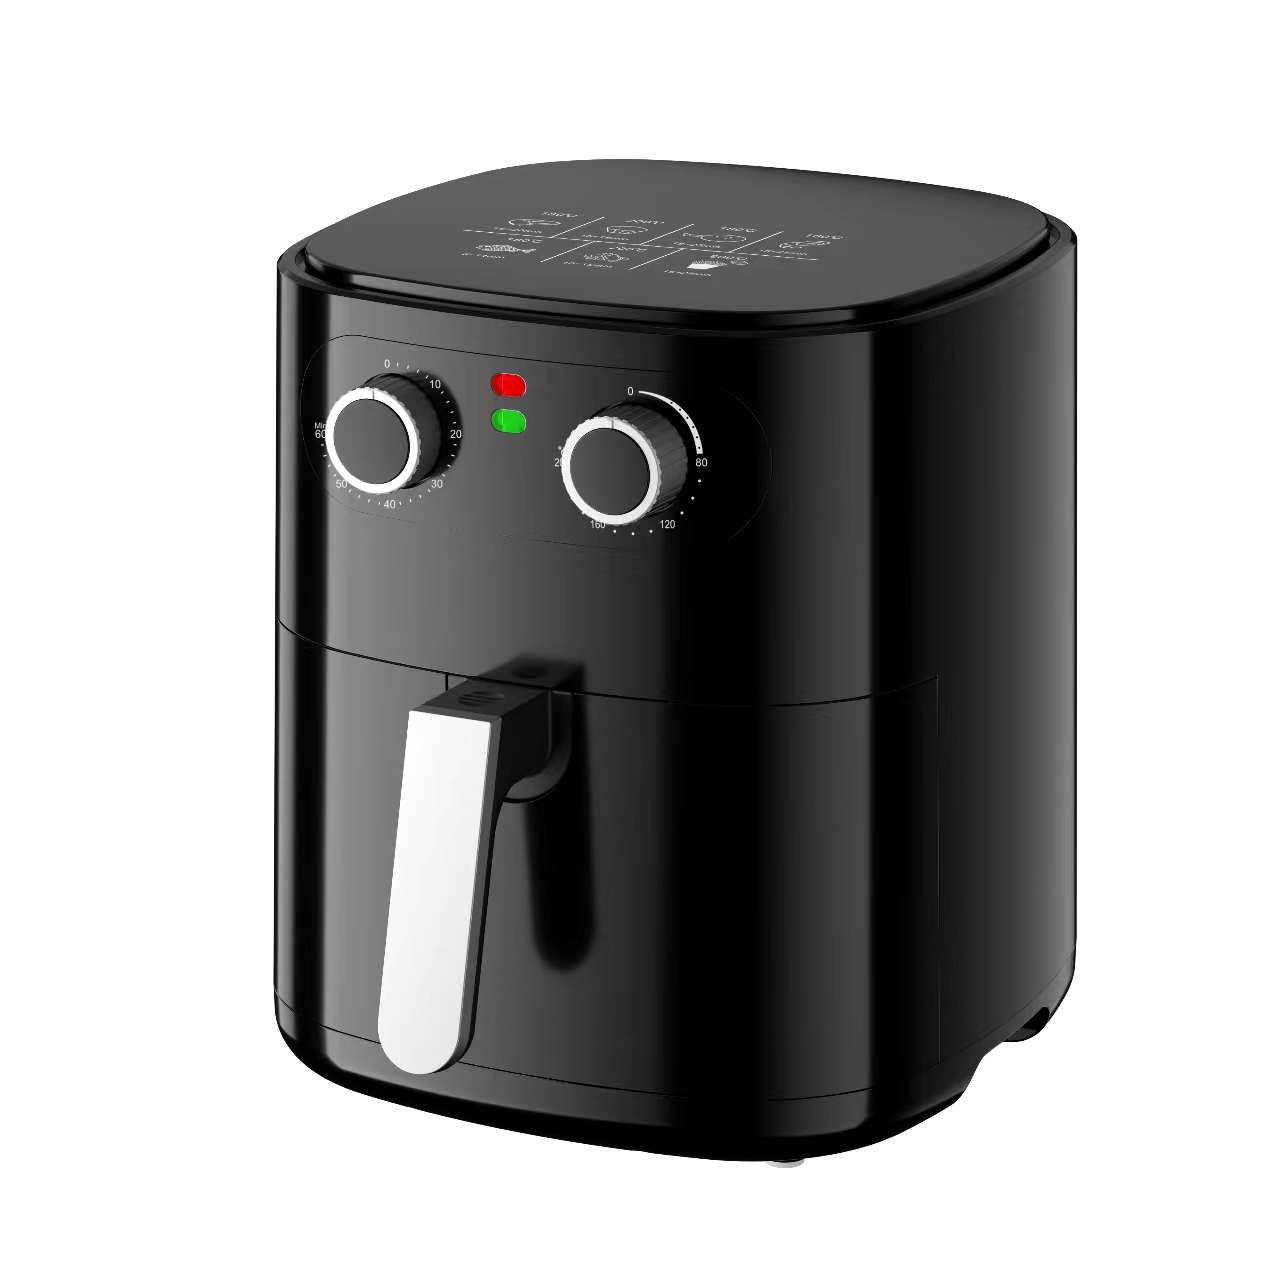 MACHHANICAL AIR FRYER 6L Featured Image